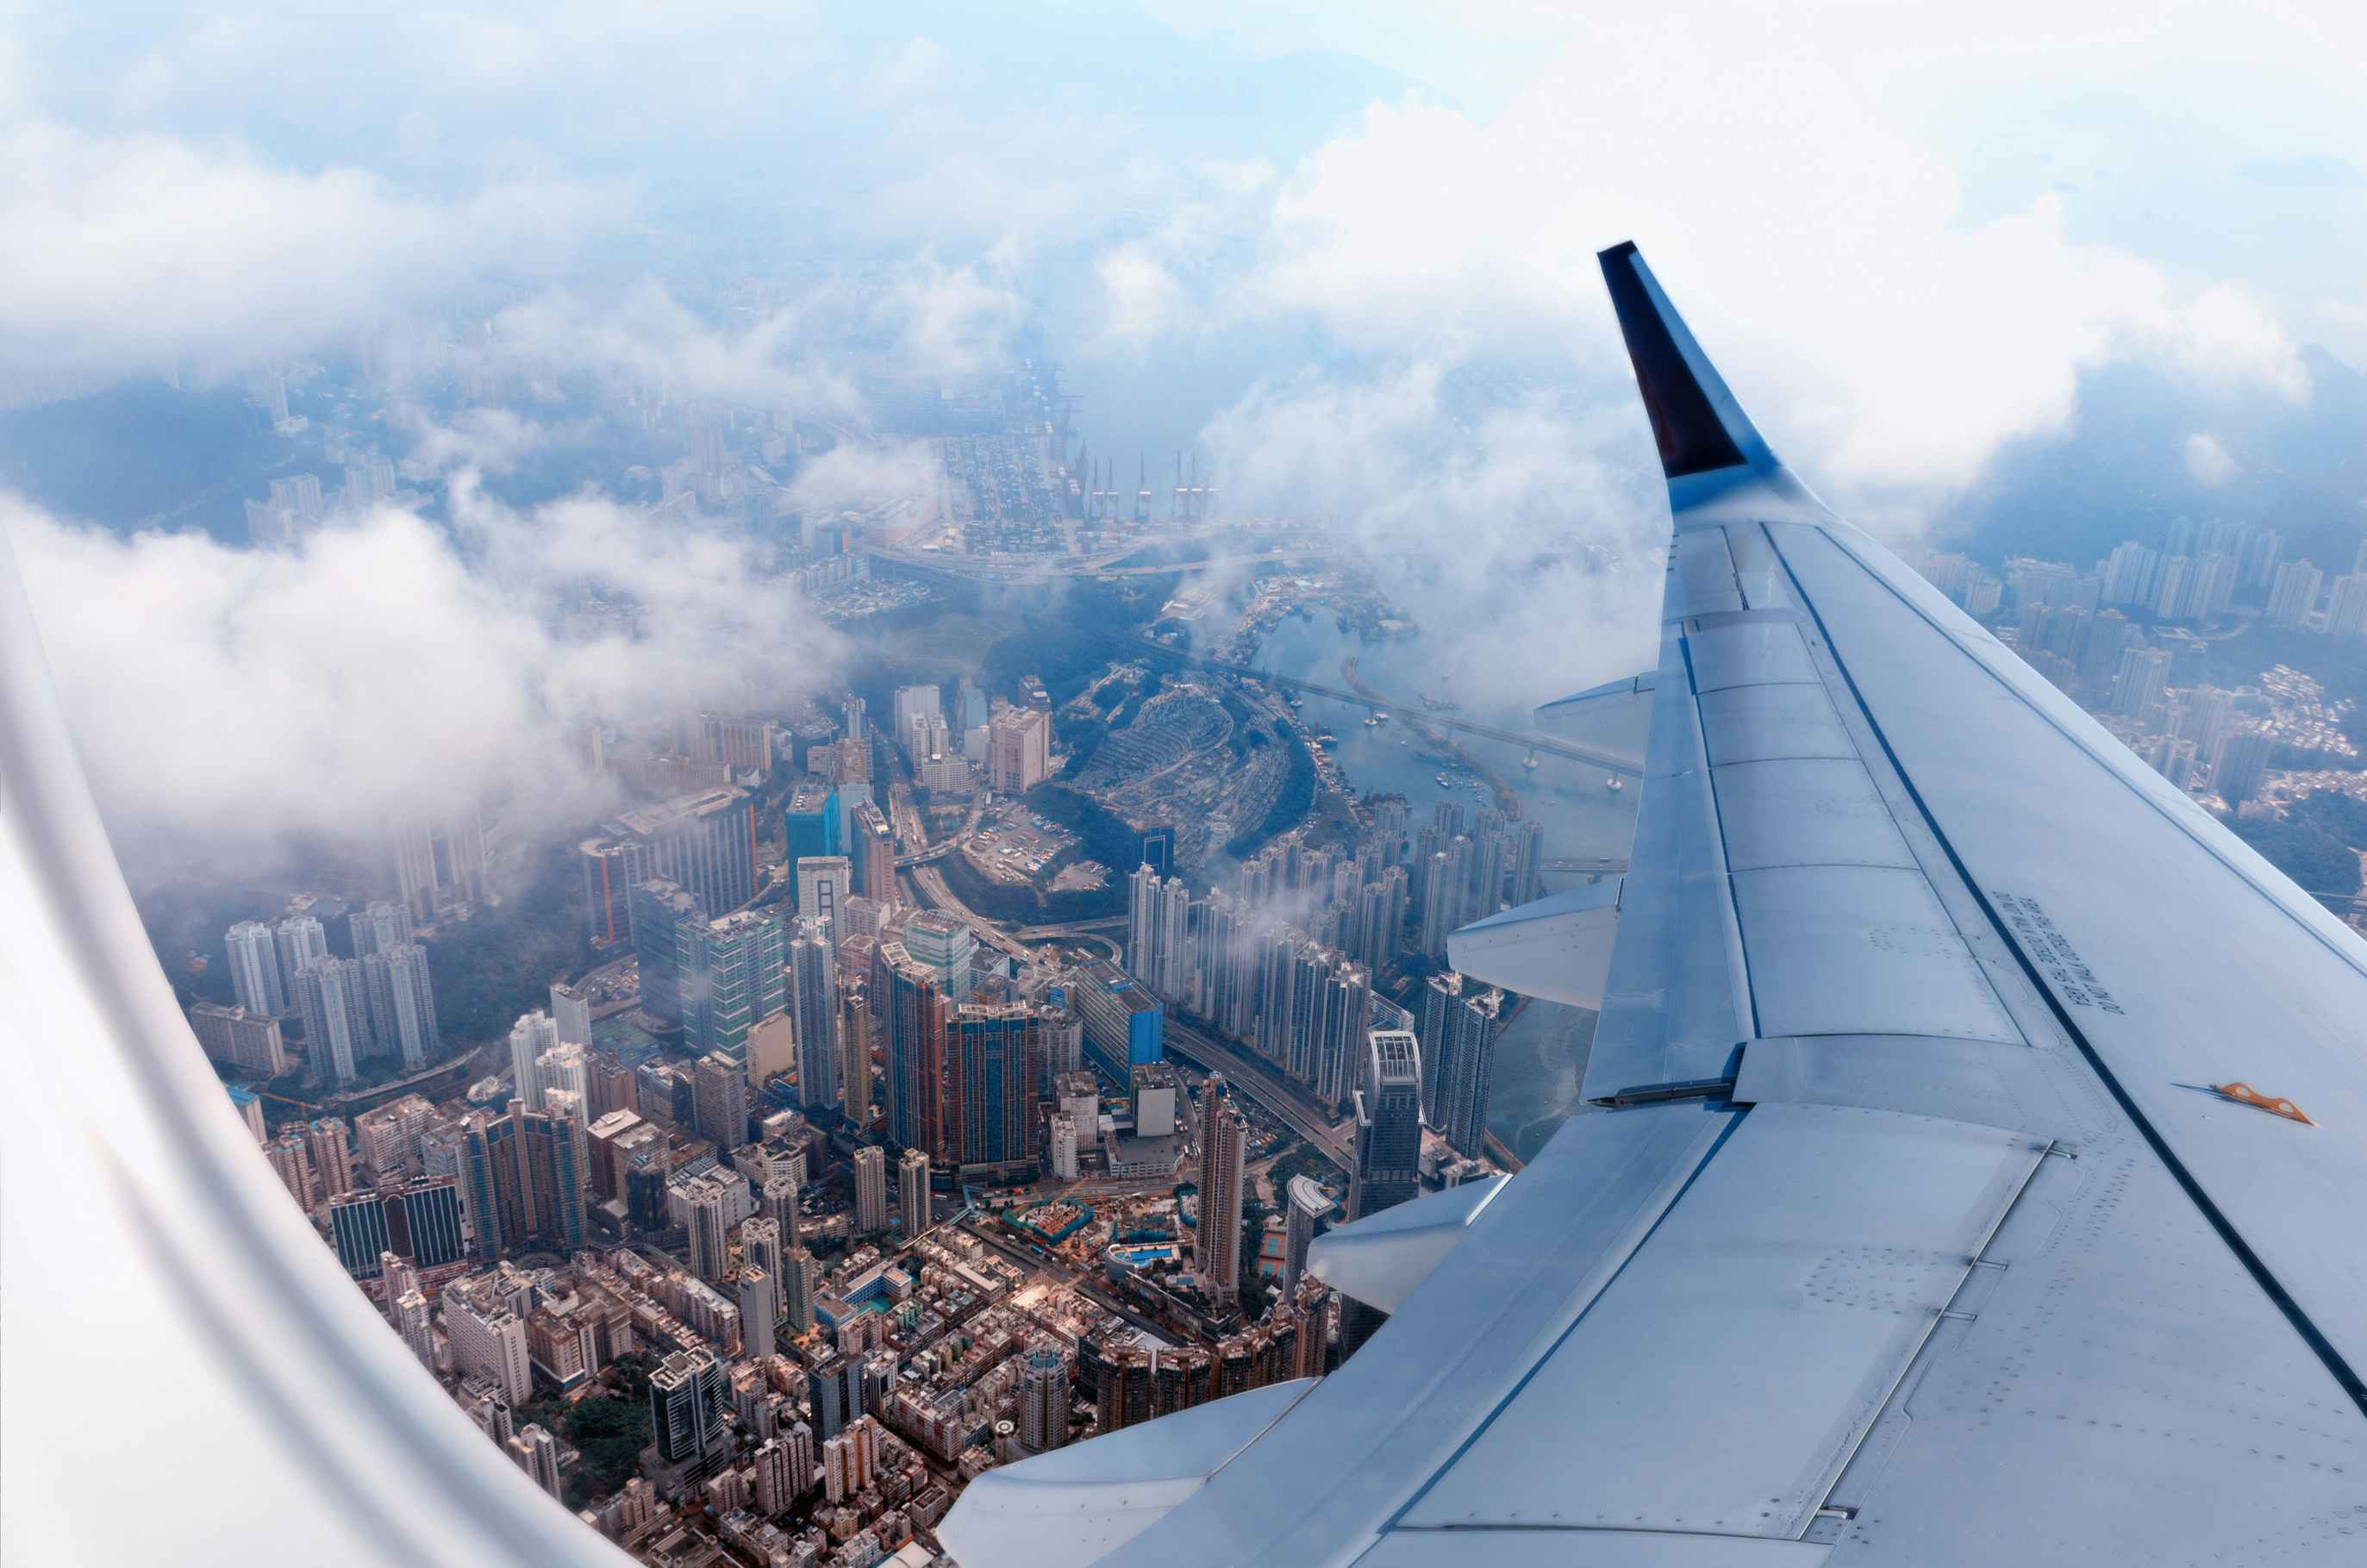 An aerial view of Hong Kong from an airplane window.